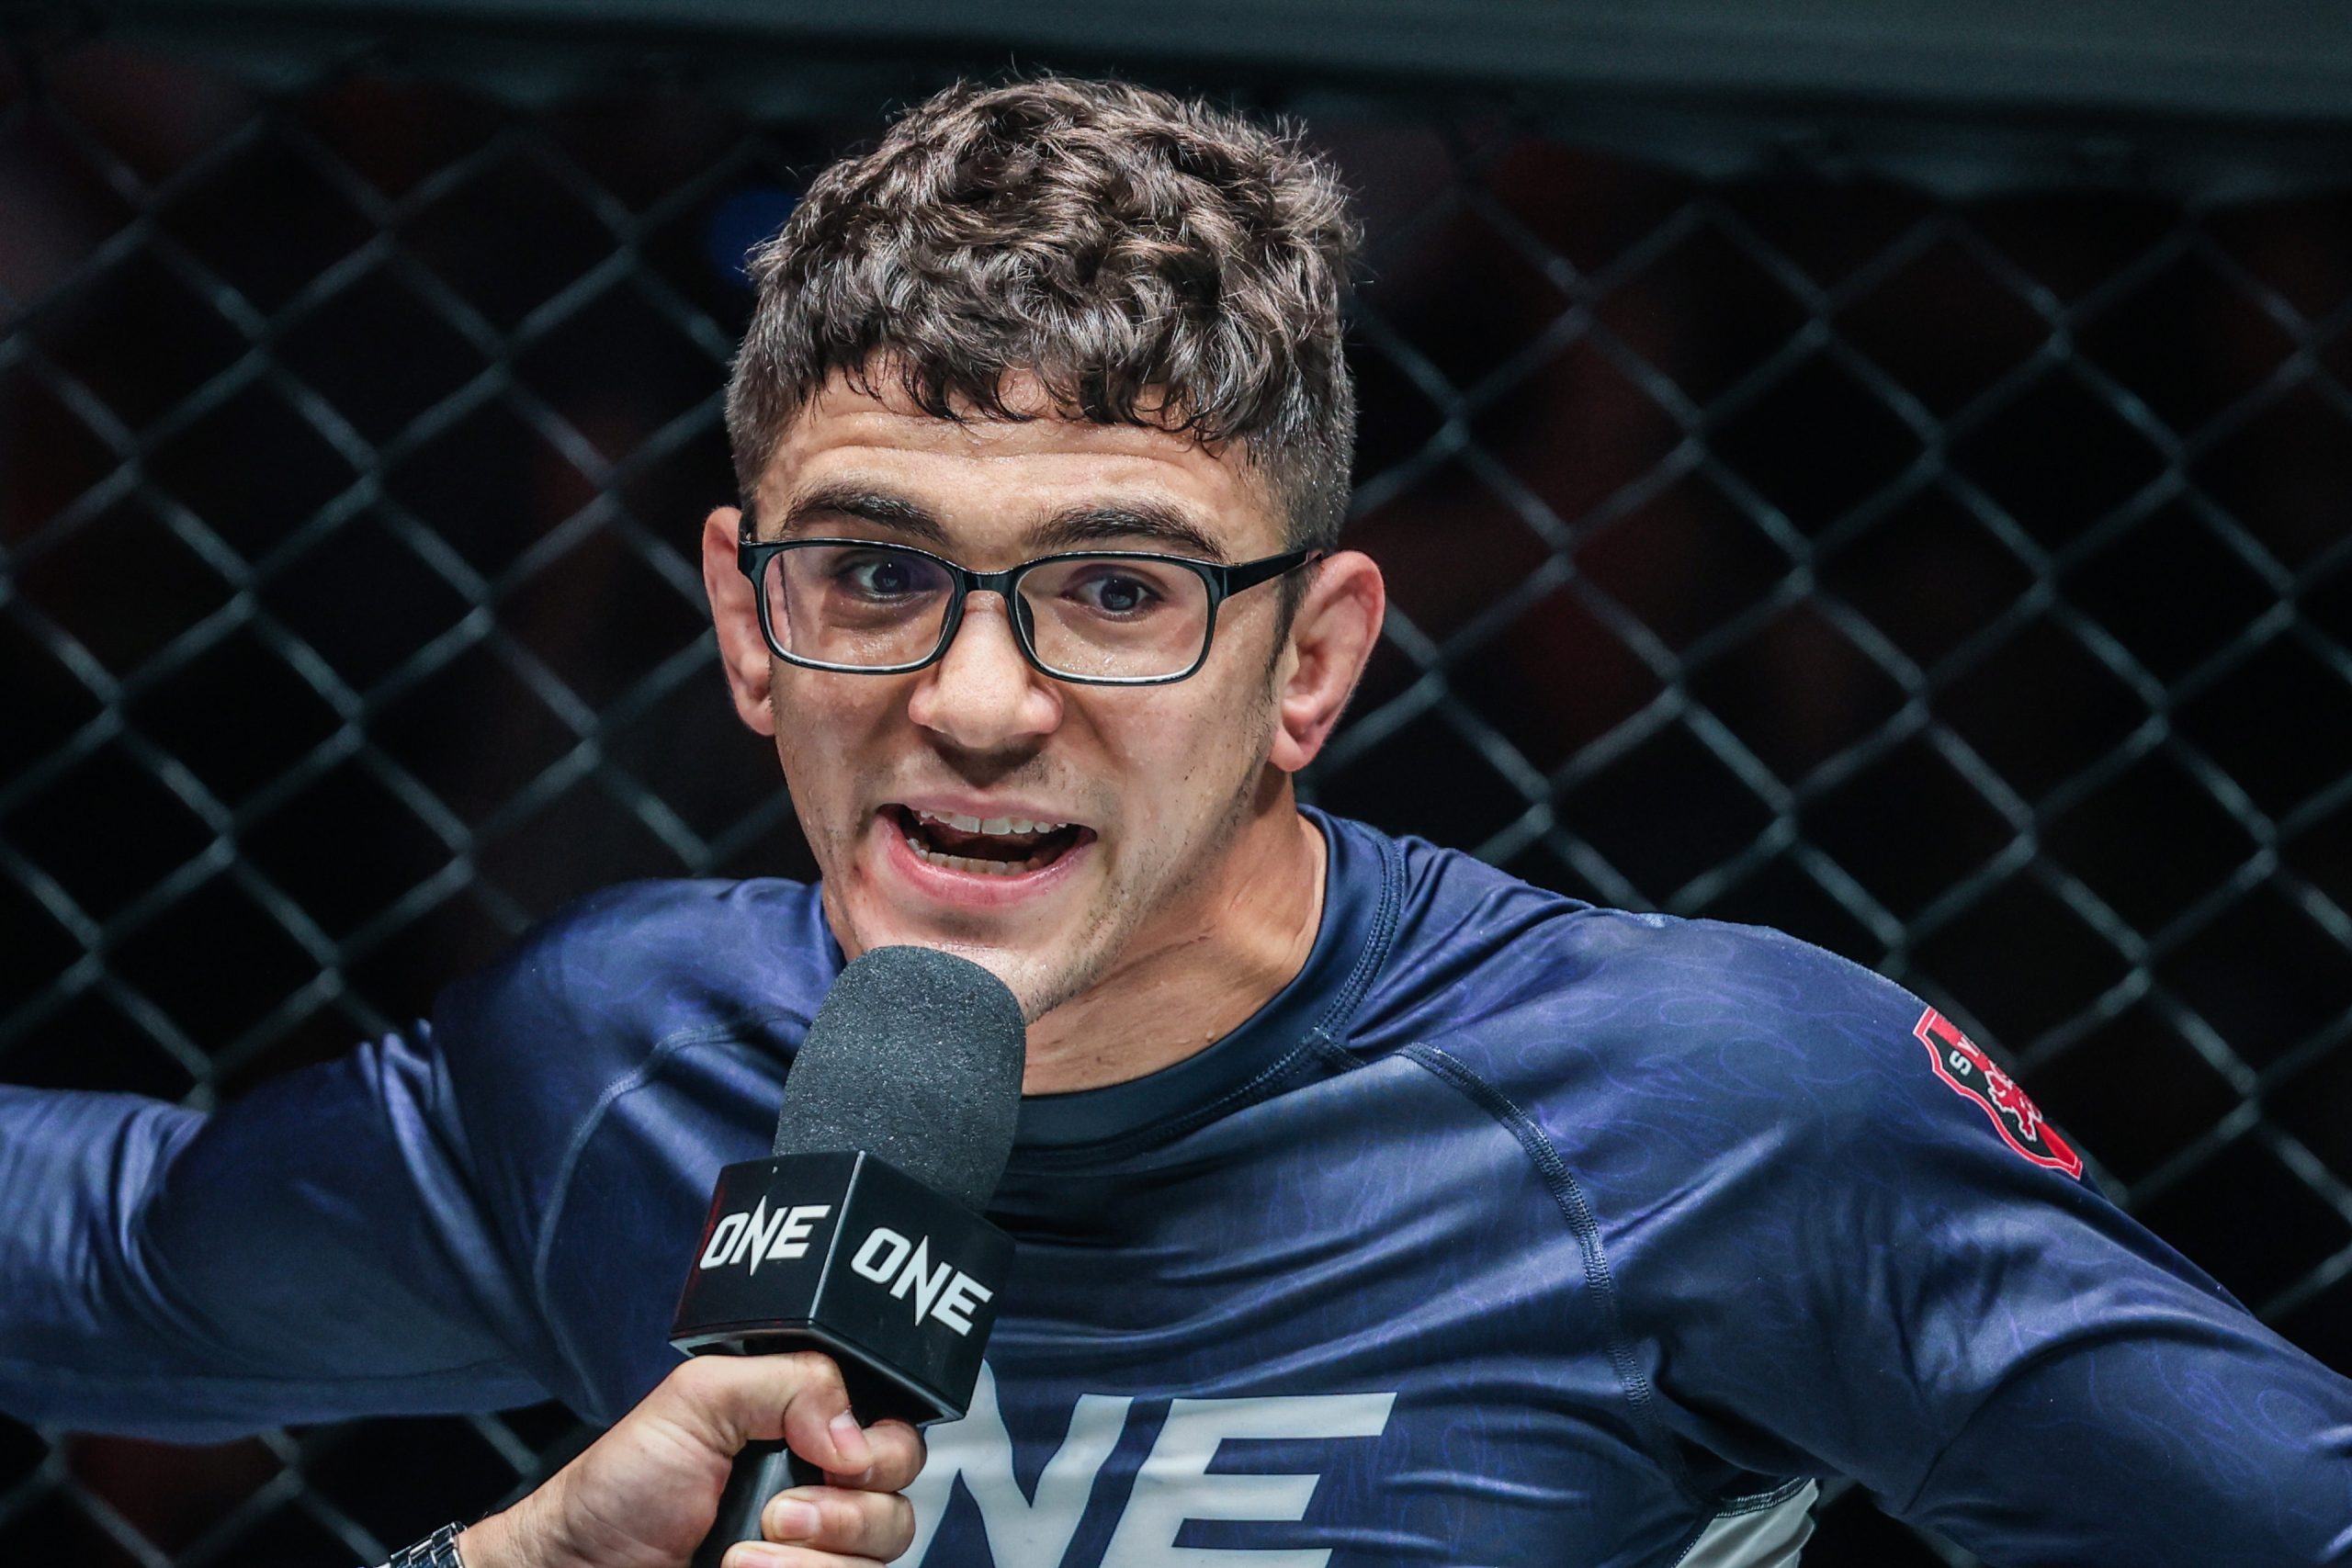 Mikey Musumeci reflects on emotional win over Gabriel Sousa: “It was just more about me finally shutting him up” [Video]